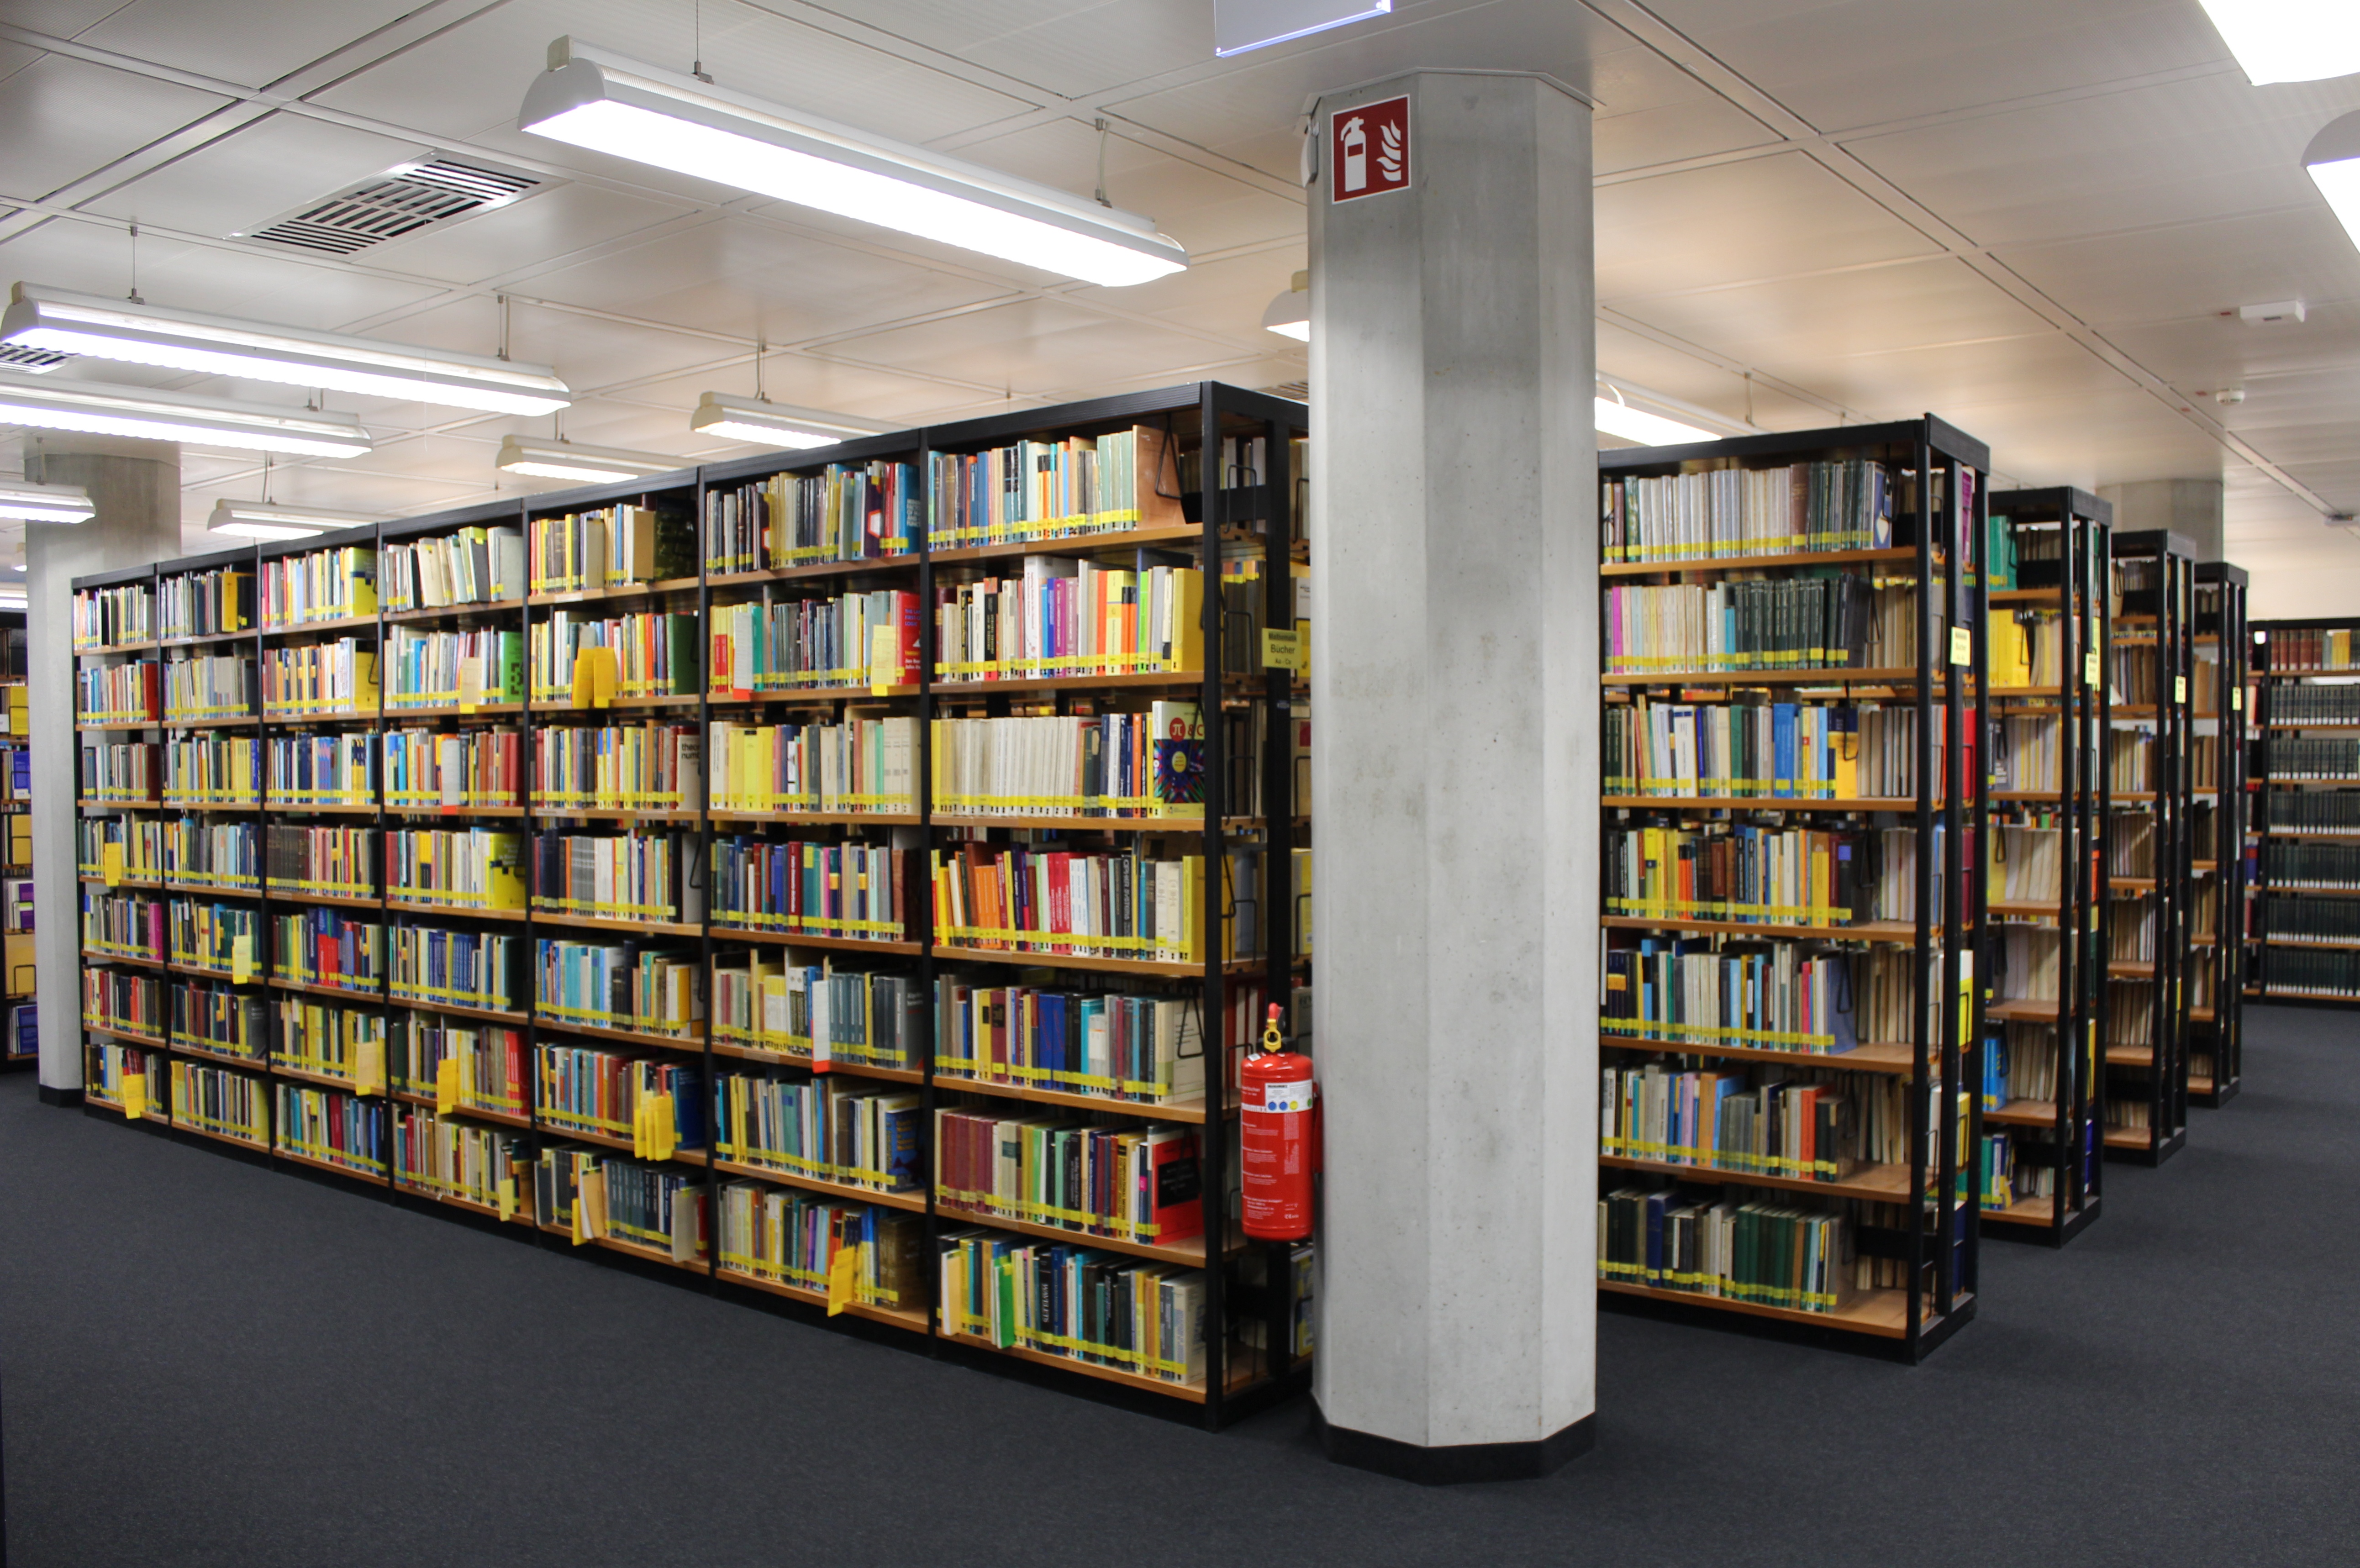 Several shelves are filled with books, a fire extinguisher can be seen on a column next to the shelf.